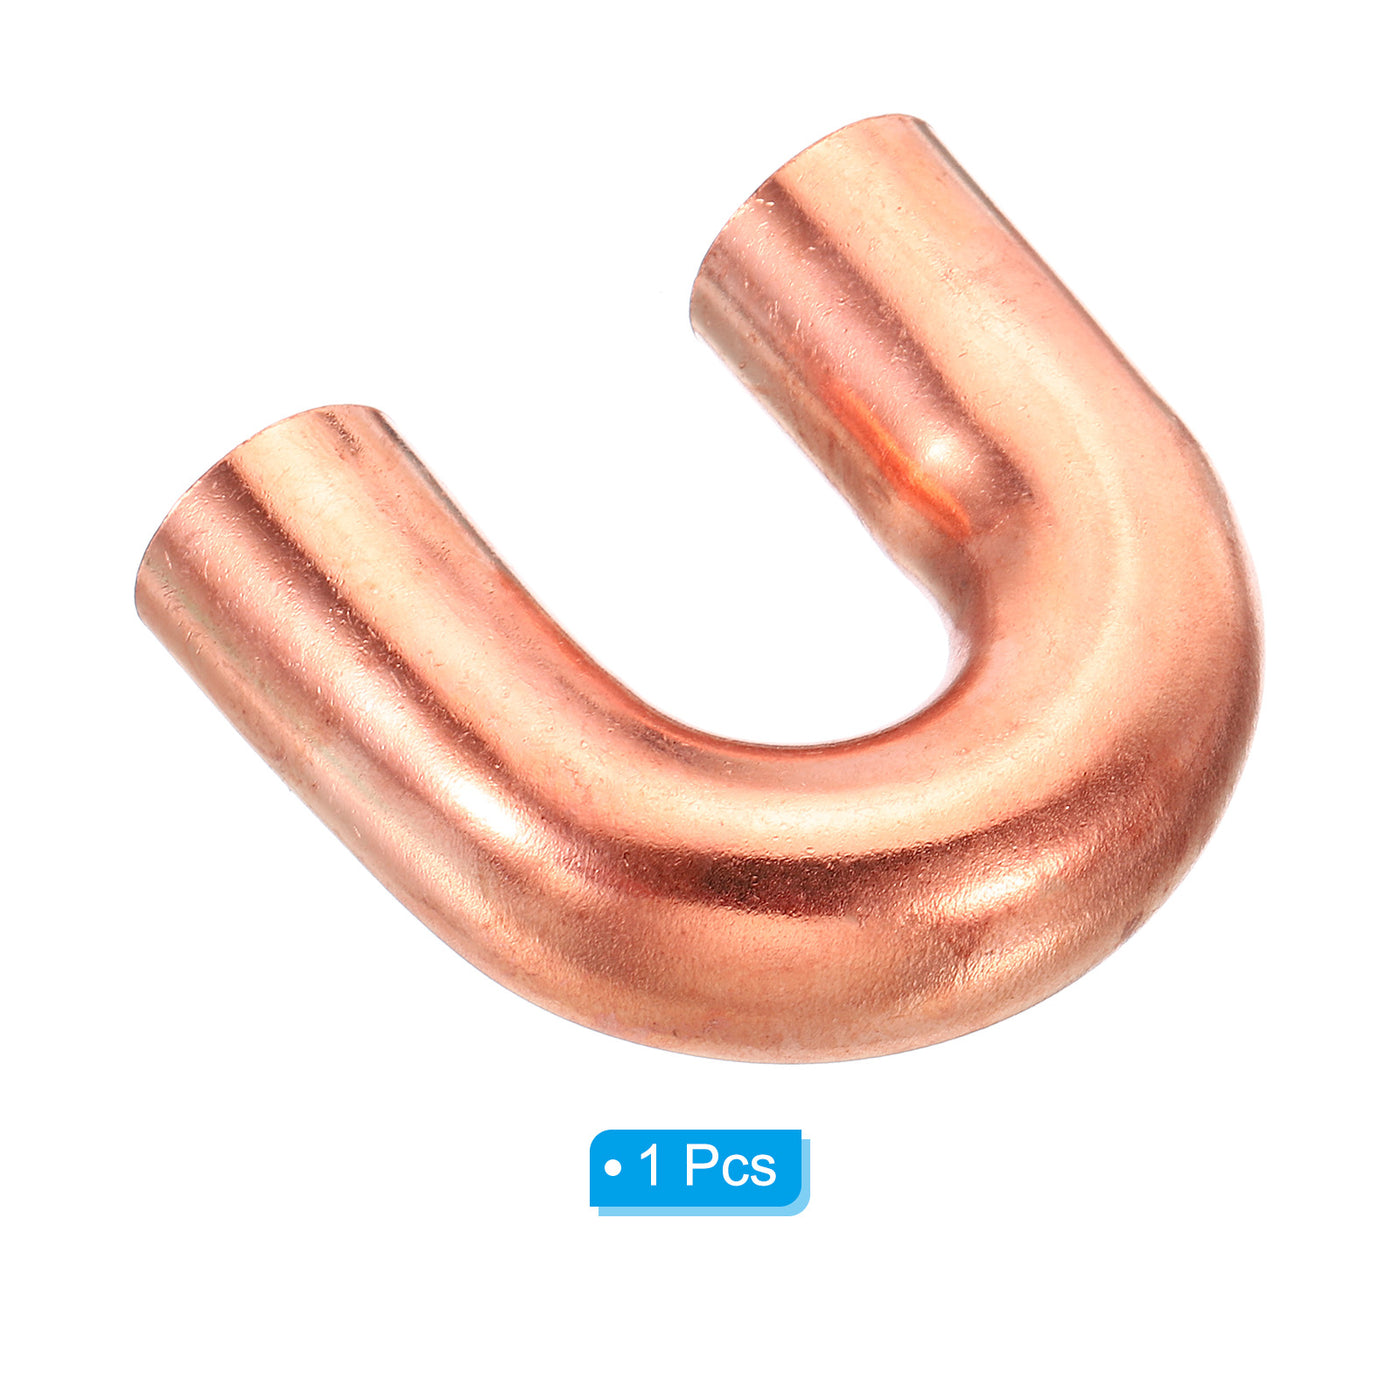 Harfington 3/4 Inch OD 58x51mm Elbow Copper Pipe Fitting, 180 Degree Bend Welding Sweat Solder Connection for HVAC Air Conditioner Plumbing